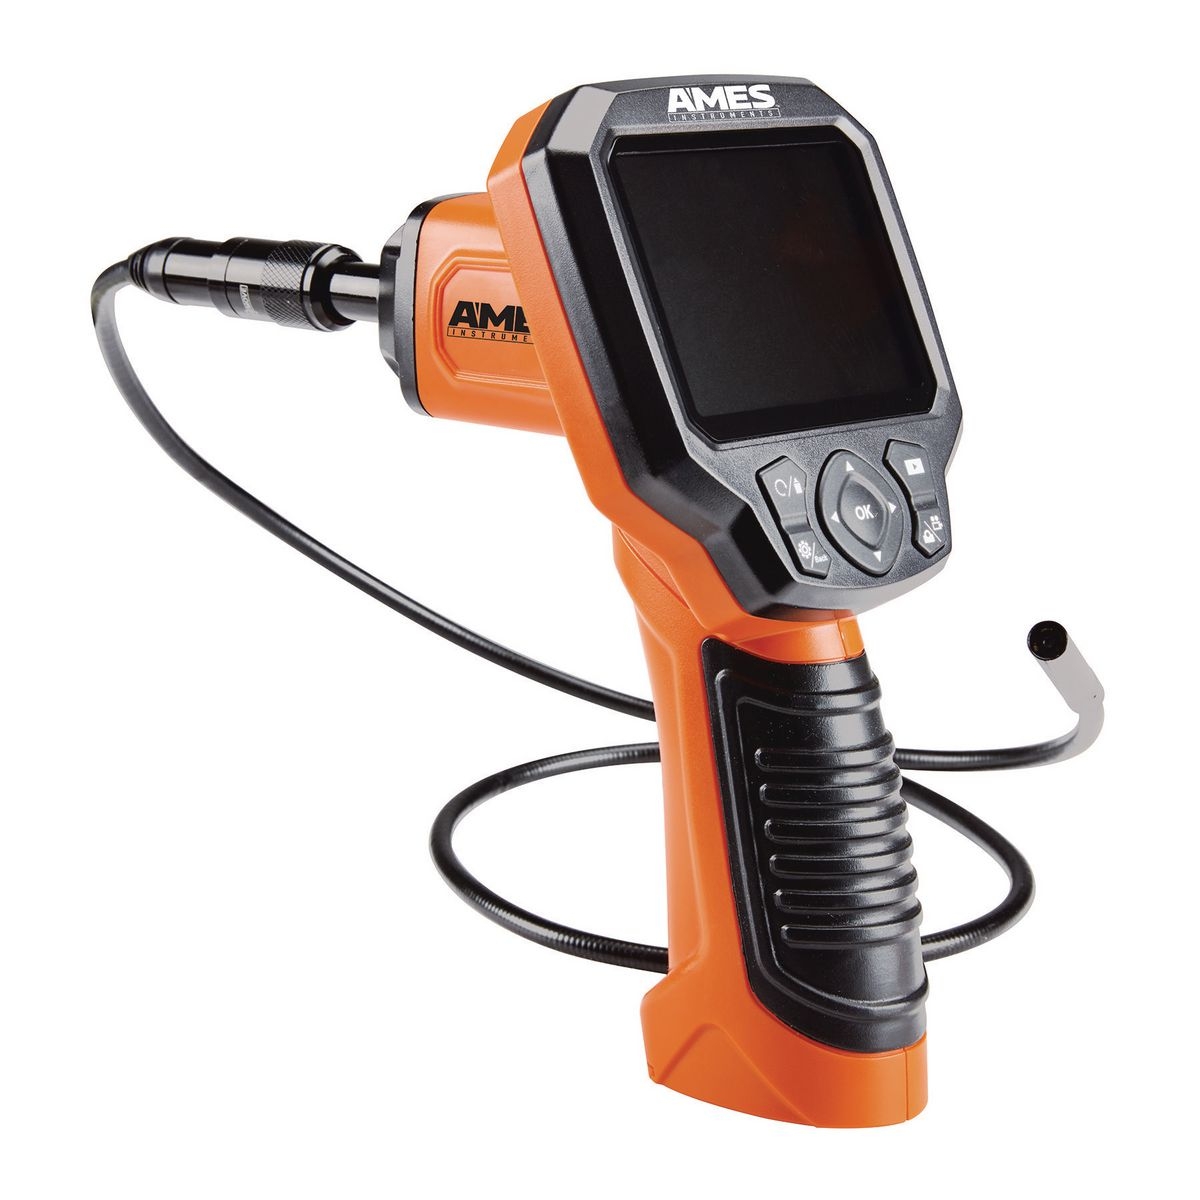 AMES INSTRUMENTS 3.5 In. Digital Inspection Camera with Micro SD Card